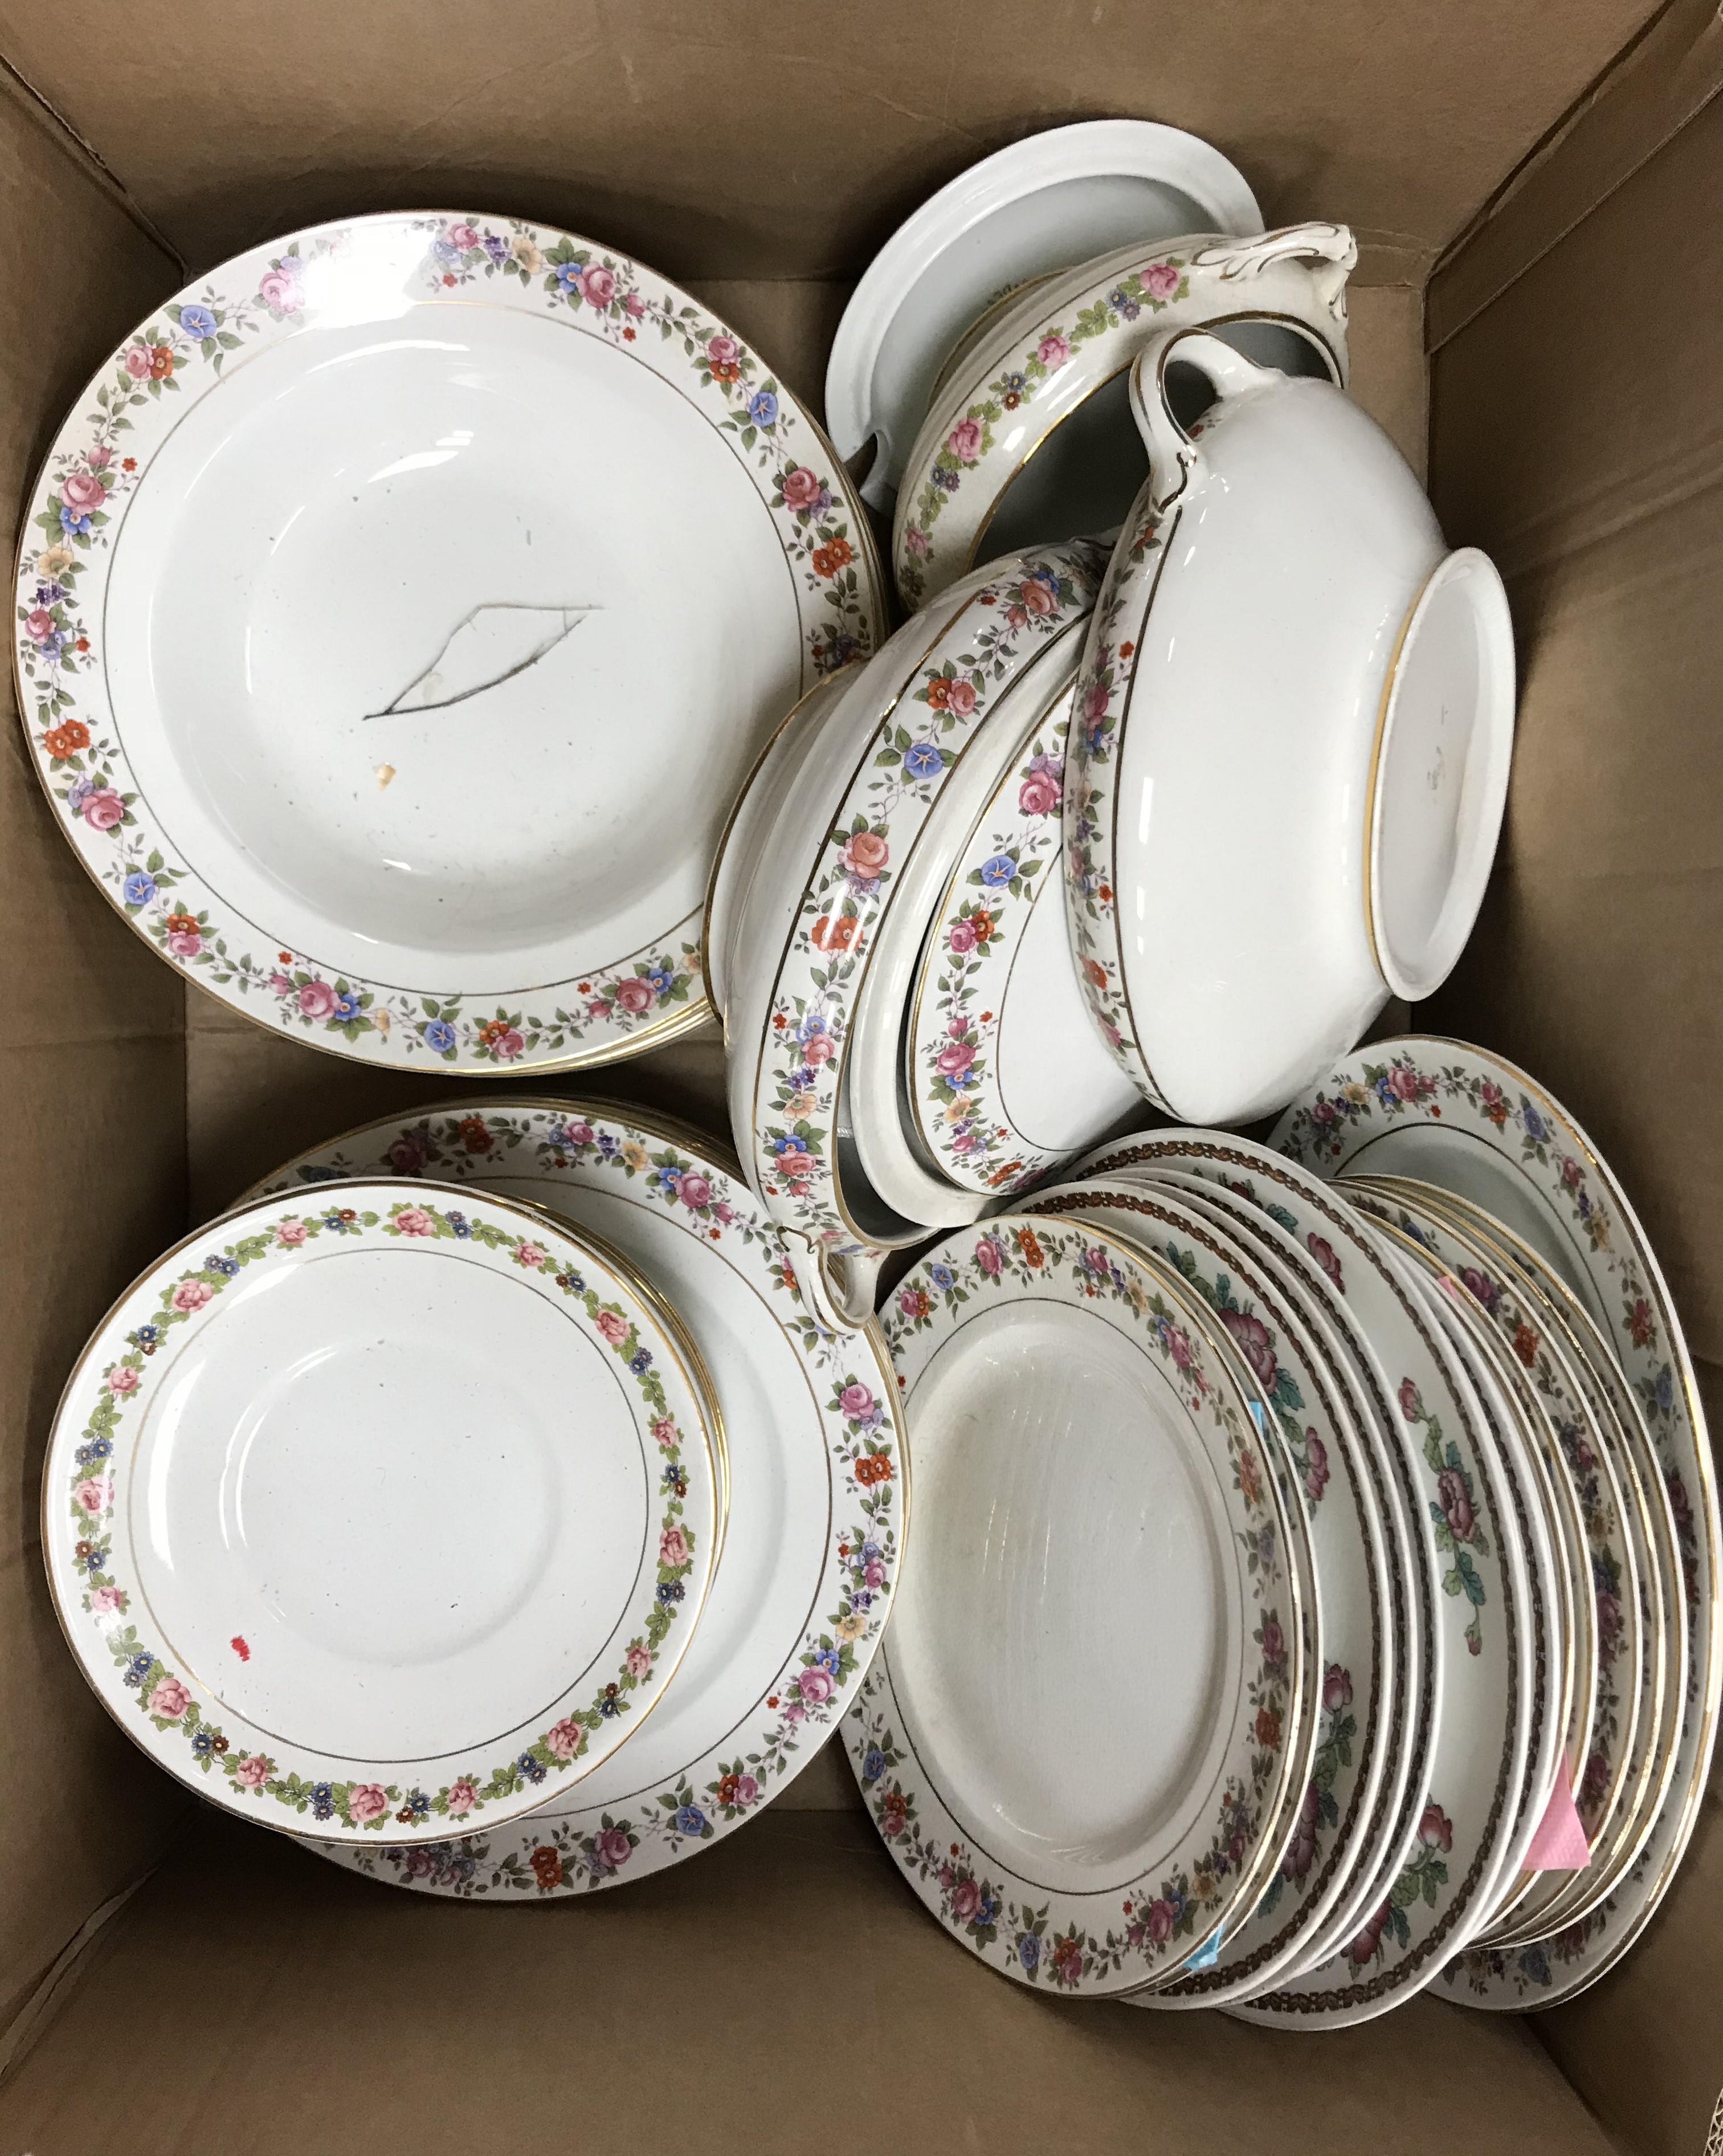 Seven boxes of assorted china wares, glassware, decorative items, etc. - Image 4 of 4